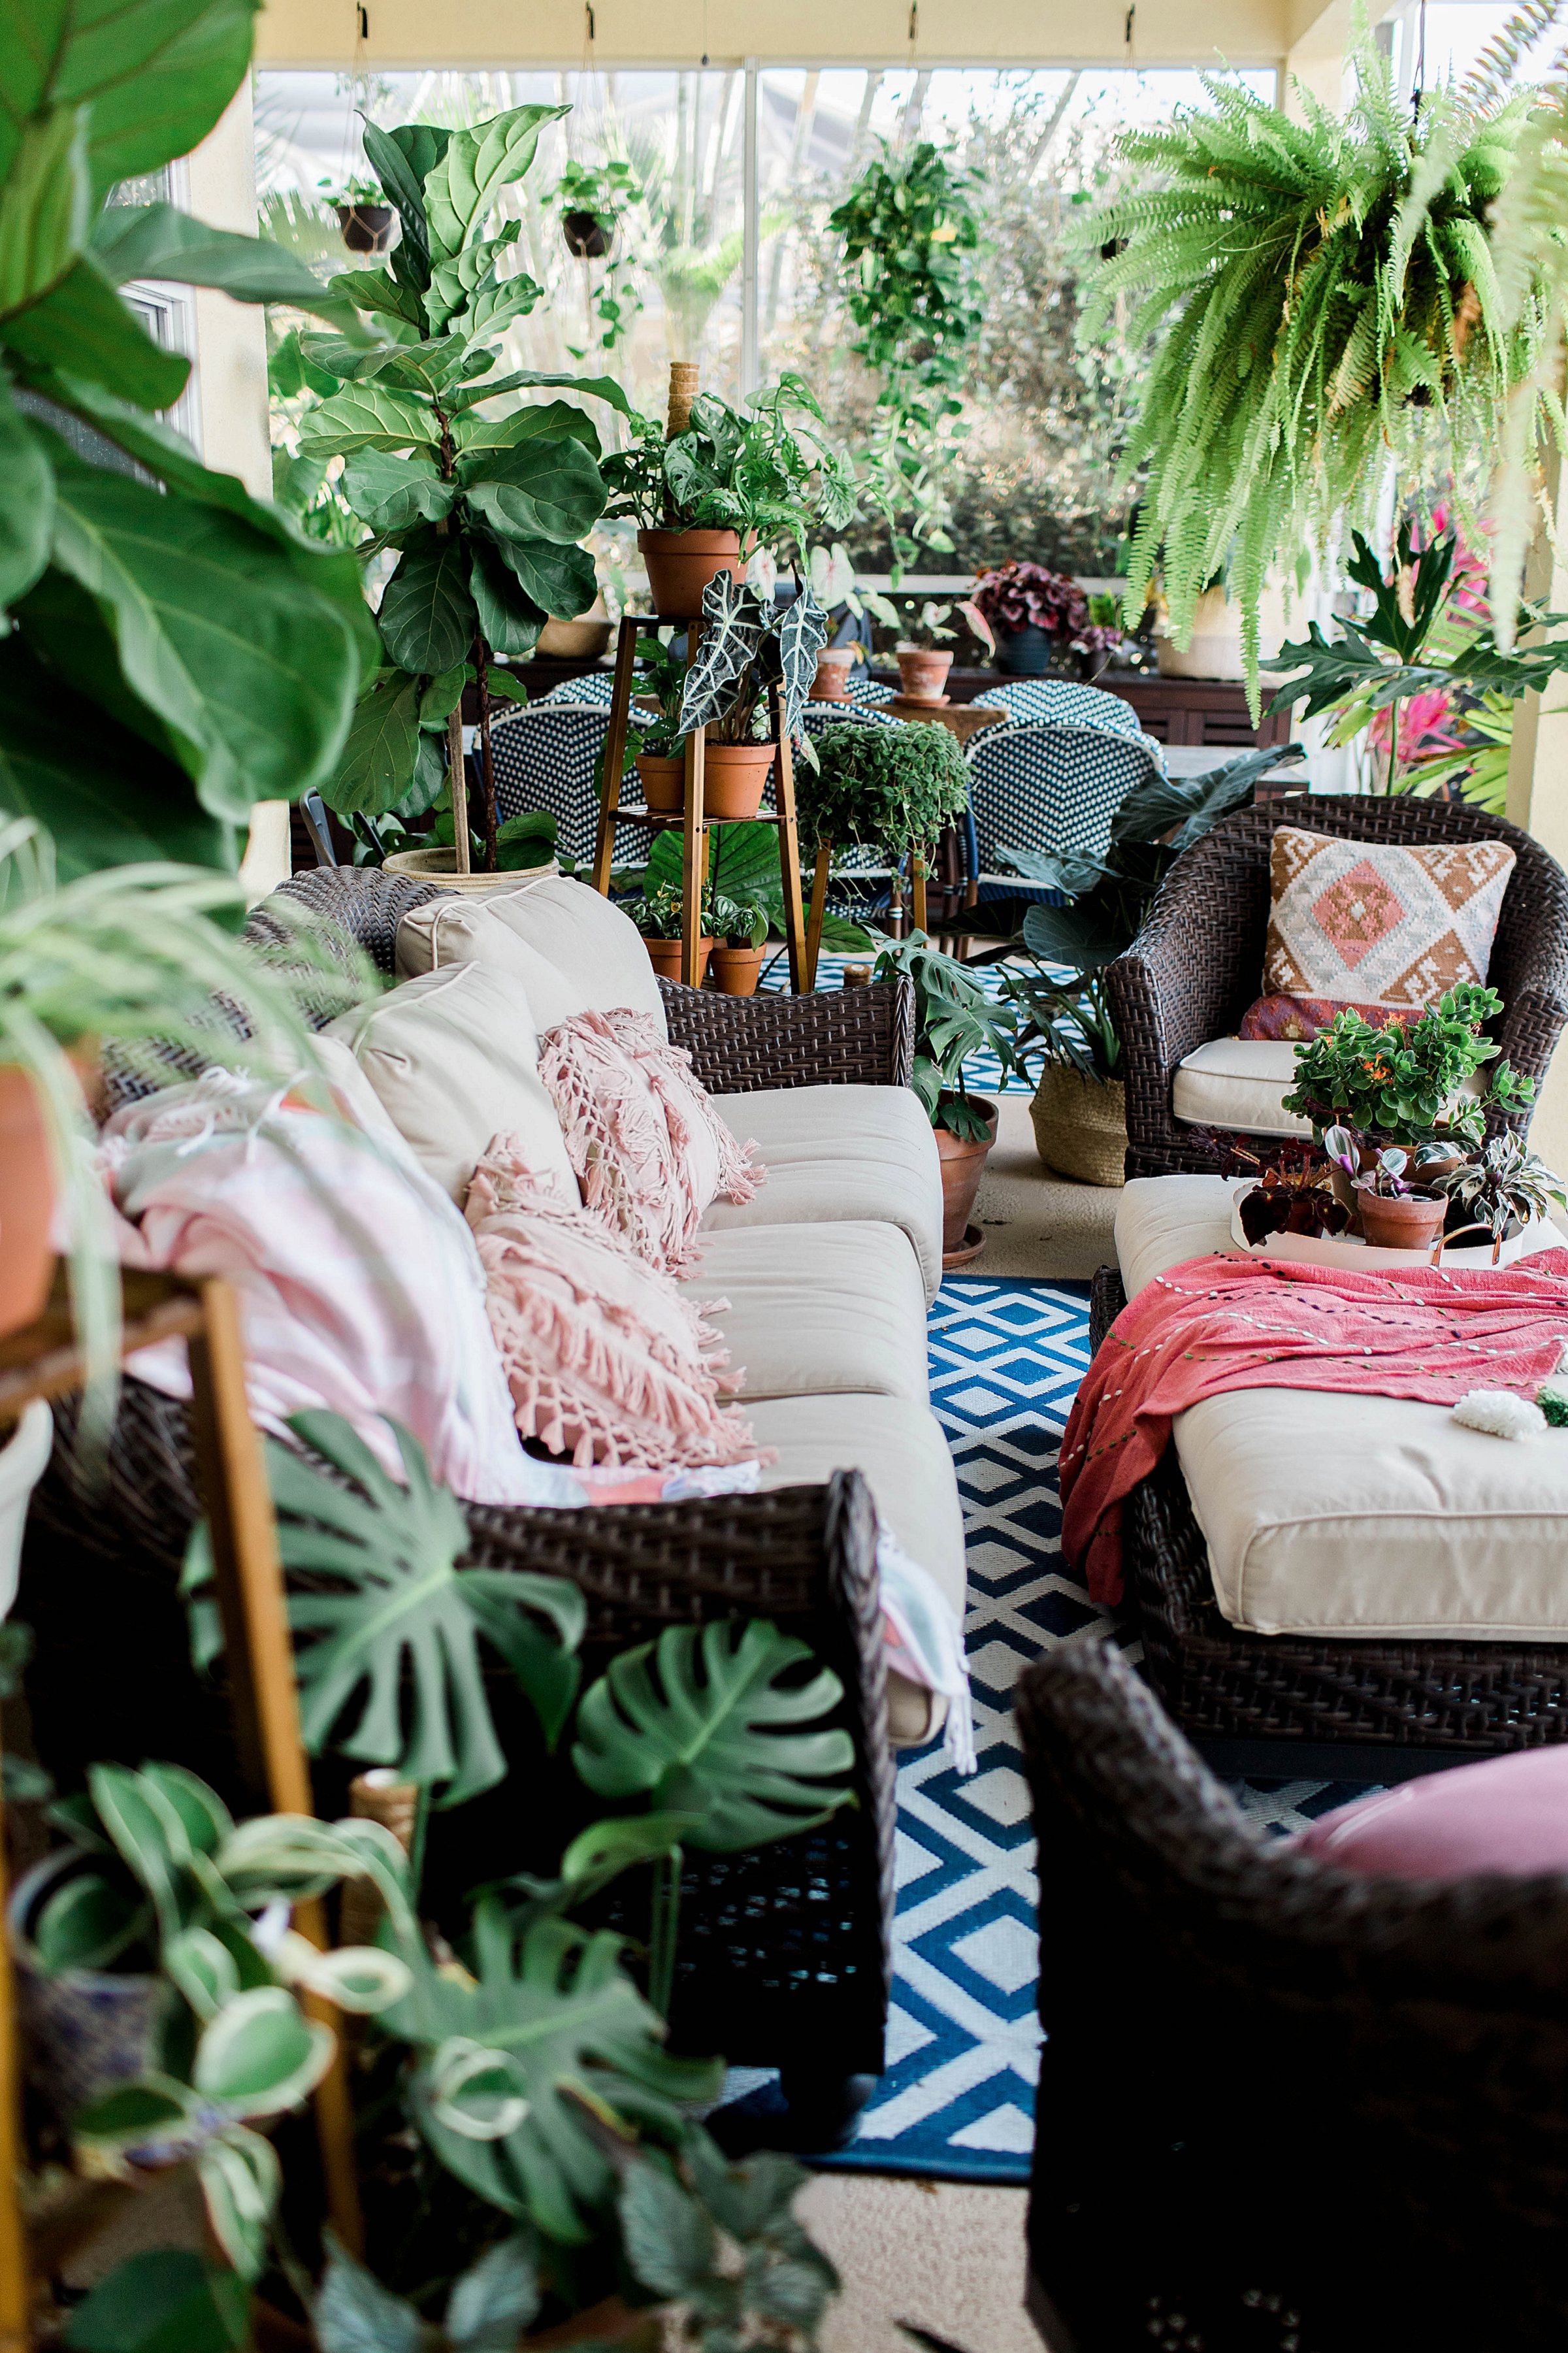 How To Decorate With House Plants!